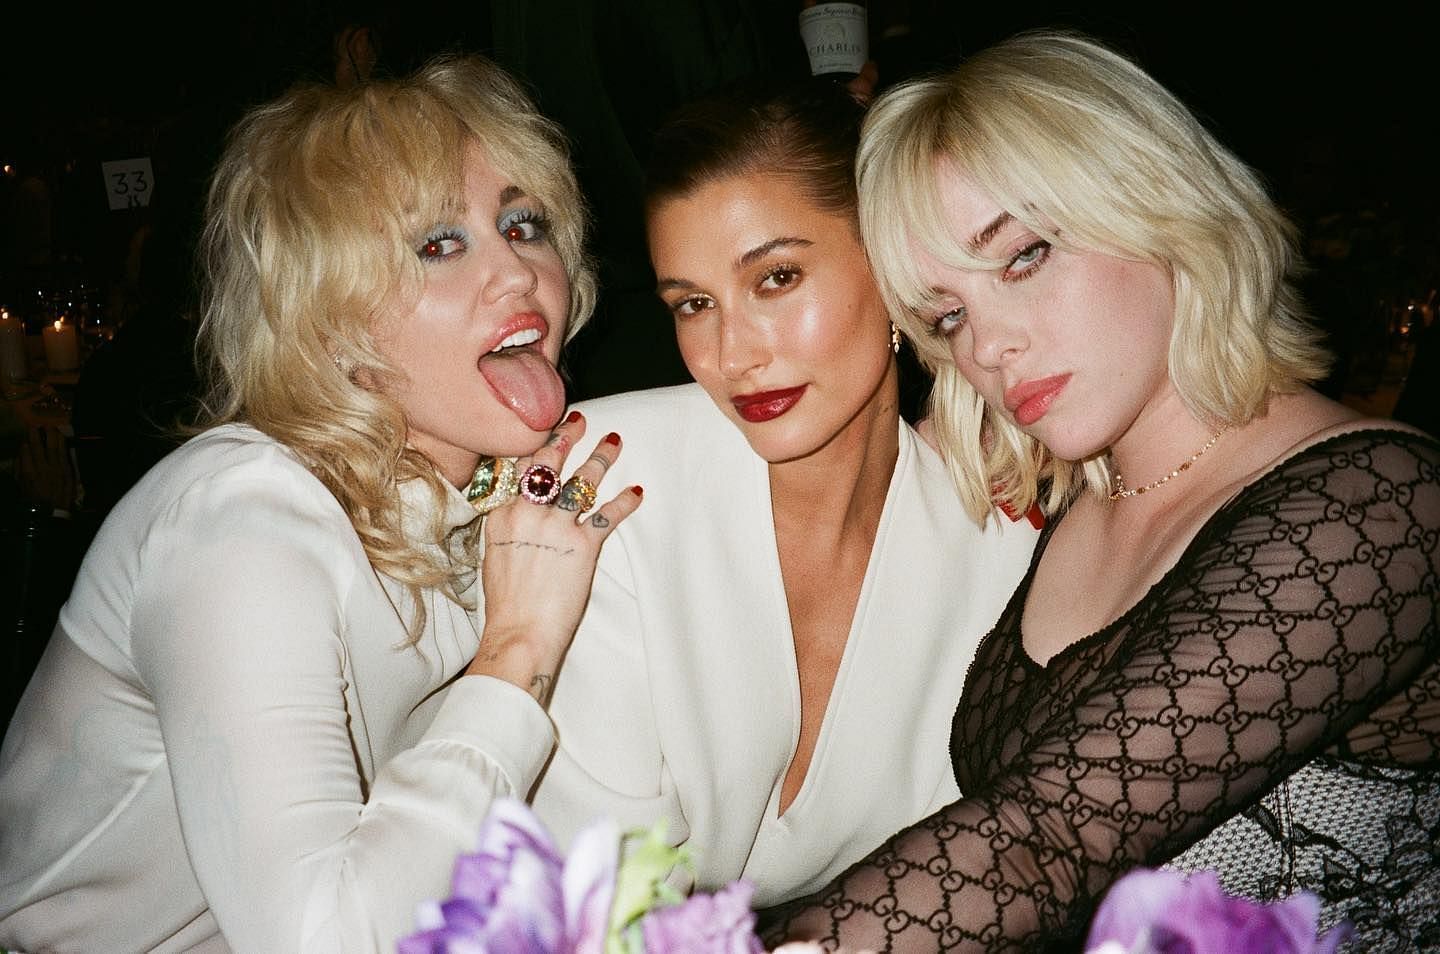 Hailey Bieber with Miley Cyrus and Billie Eilish (Image via. Twitter/@hrbsource)